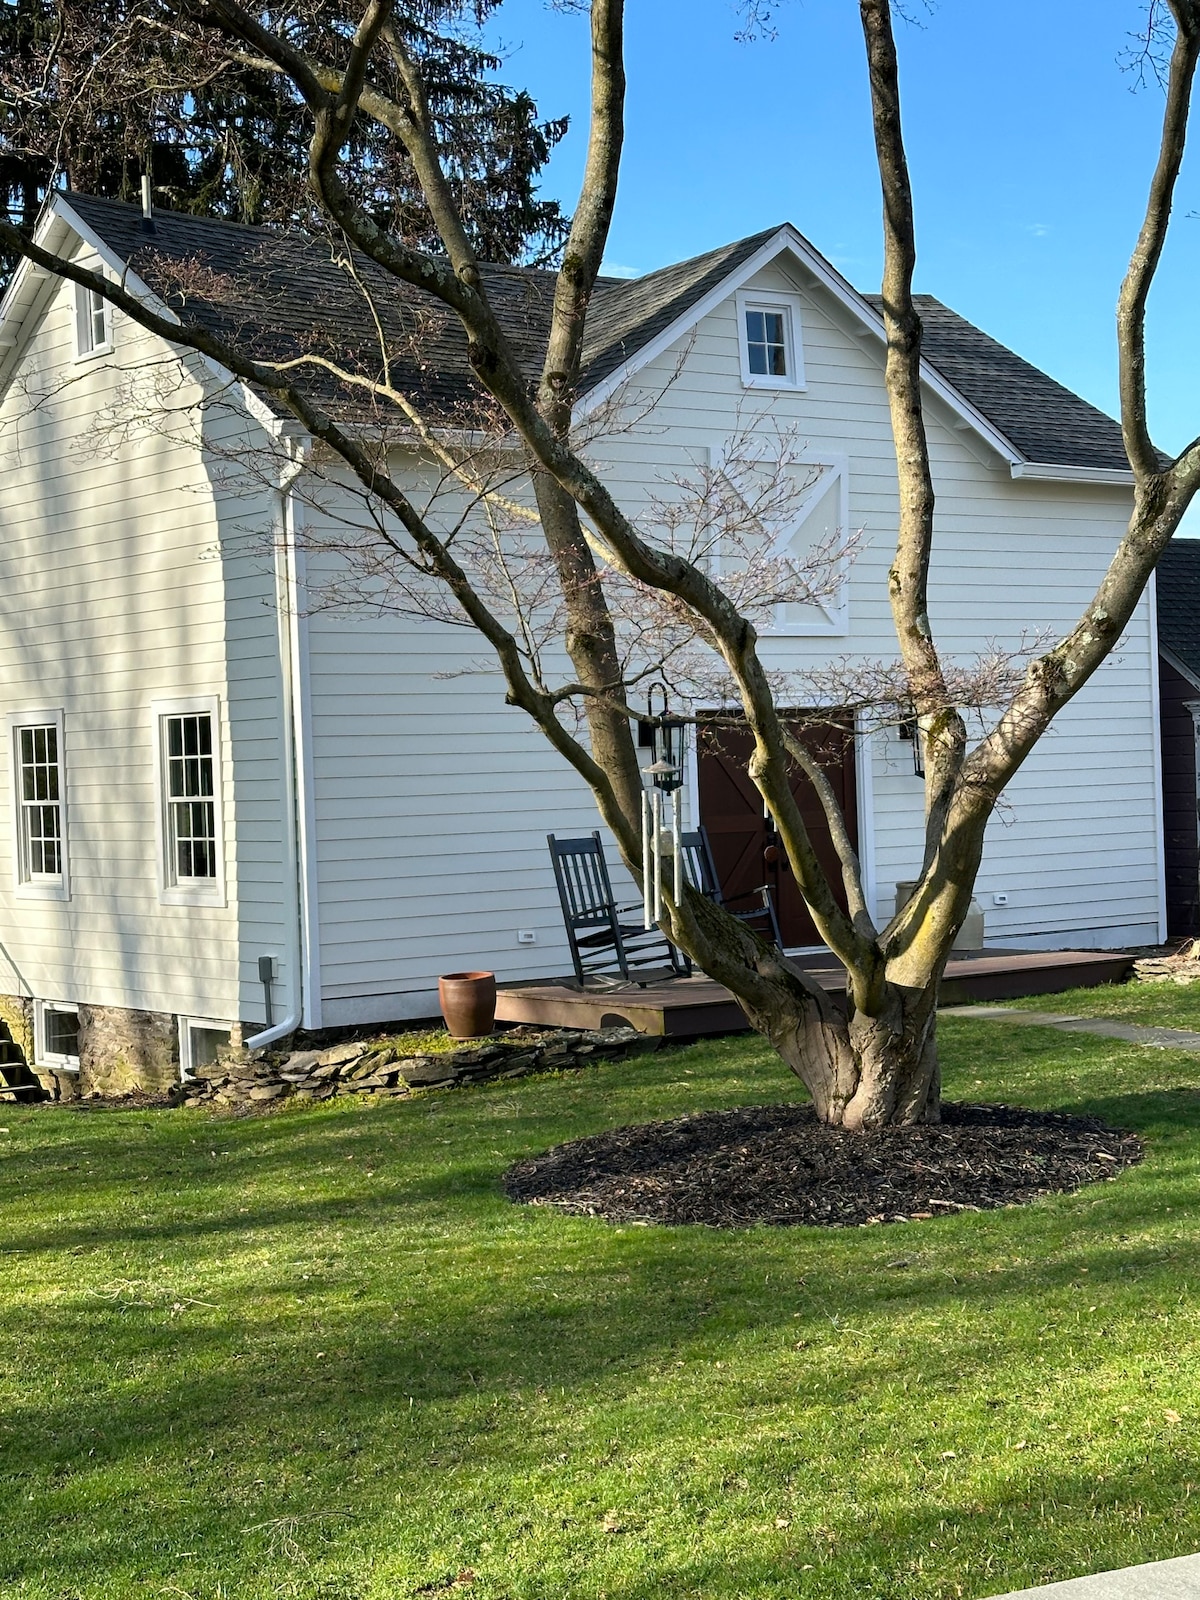 The Carriage House at Rhinebeck